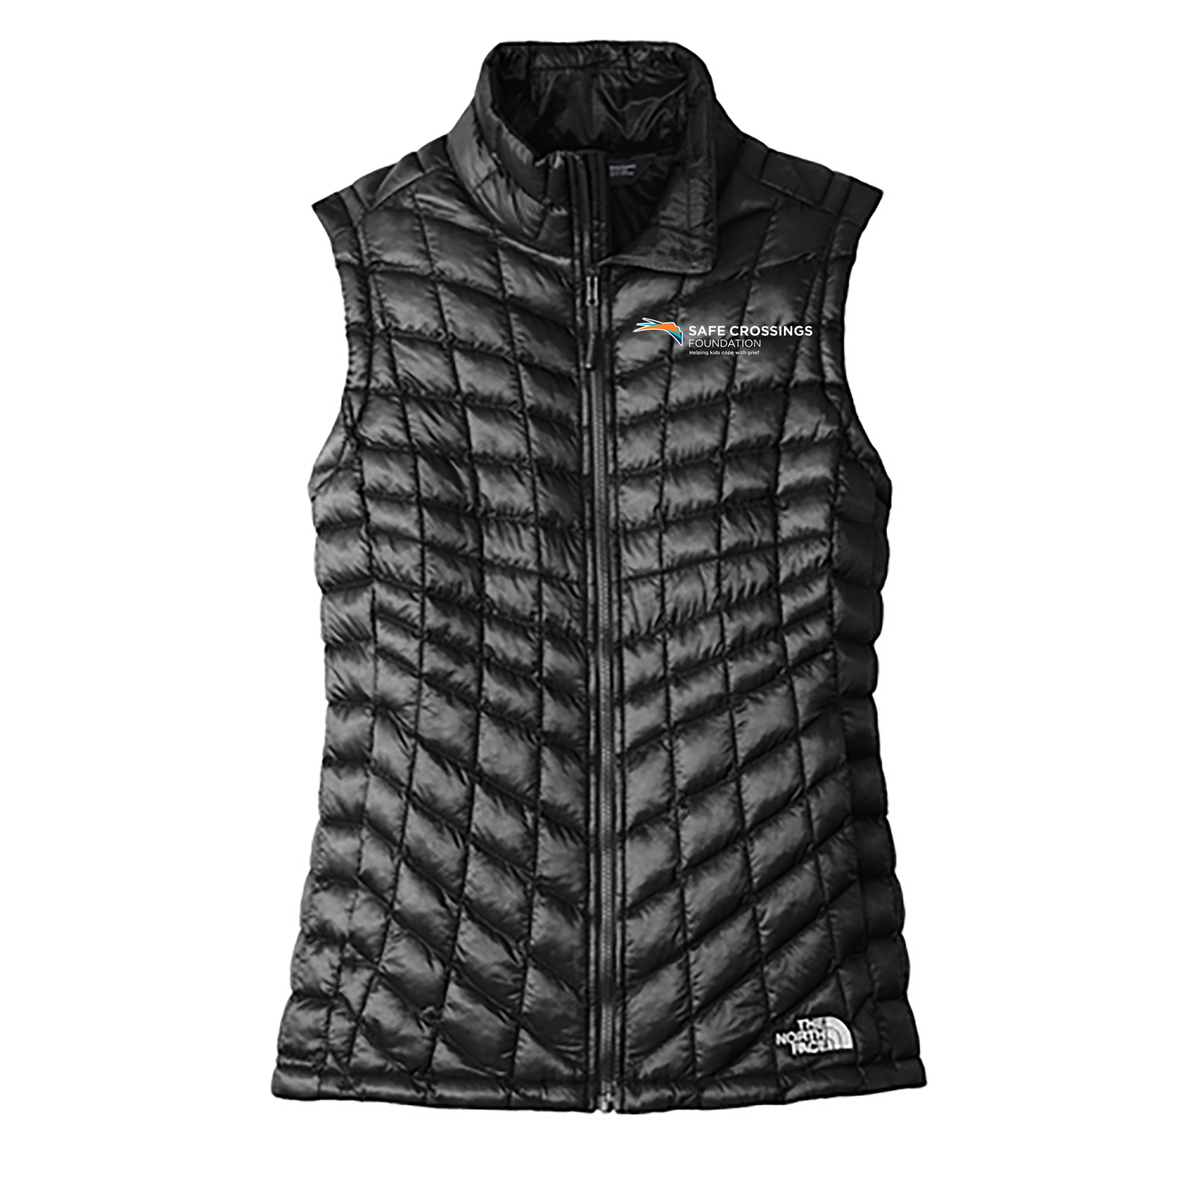 Safe Crossings Foundation The North Face Ladies Thermoball Vest